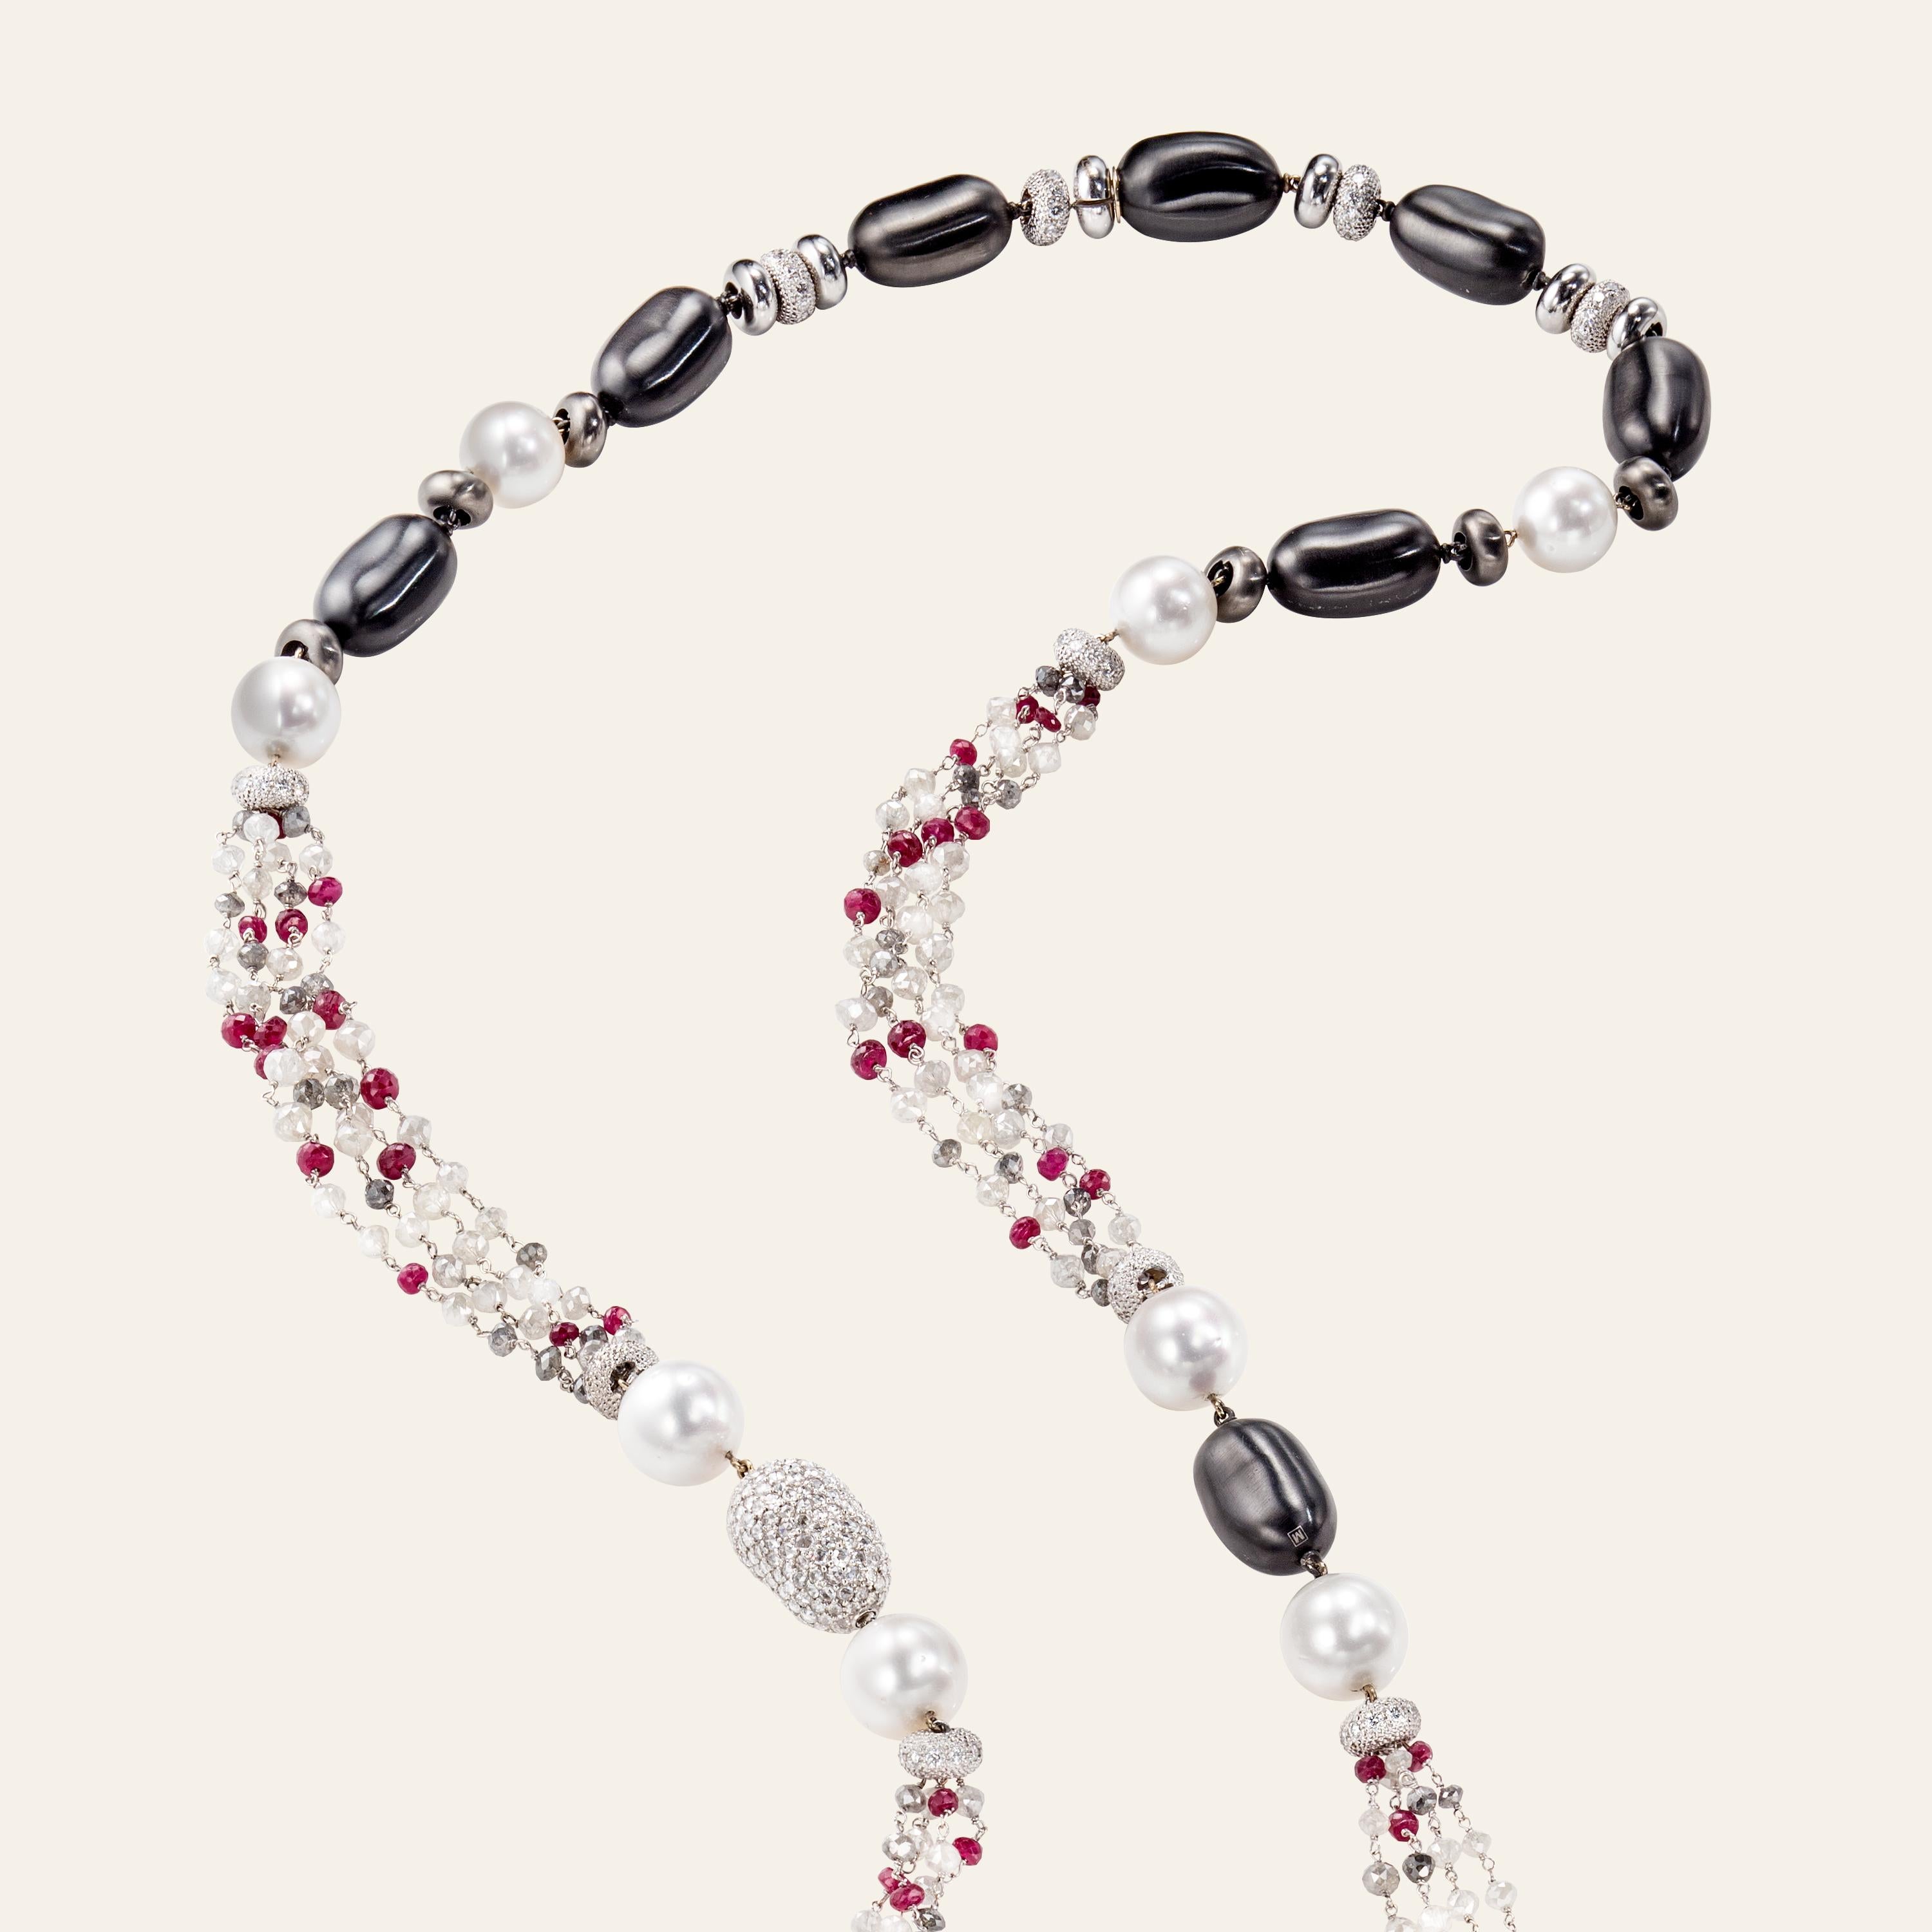 Sabbadini Jewelry Long Necklace With Pearls, Diamonds & Rubies
Long bead necklace, 18k white gold rondellas, black steel pebbles, 'south-sea' pearls, briolette diamond beads 82,48 carats, faceted ruby beads 24,63 carats, round cut diamonds 14,47